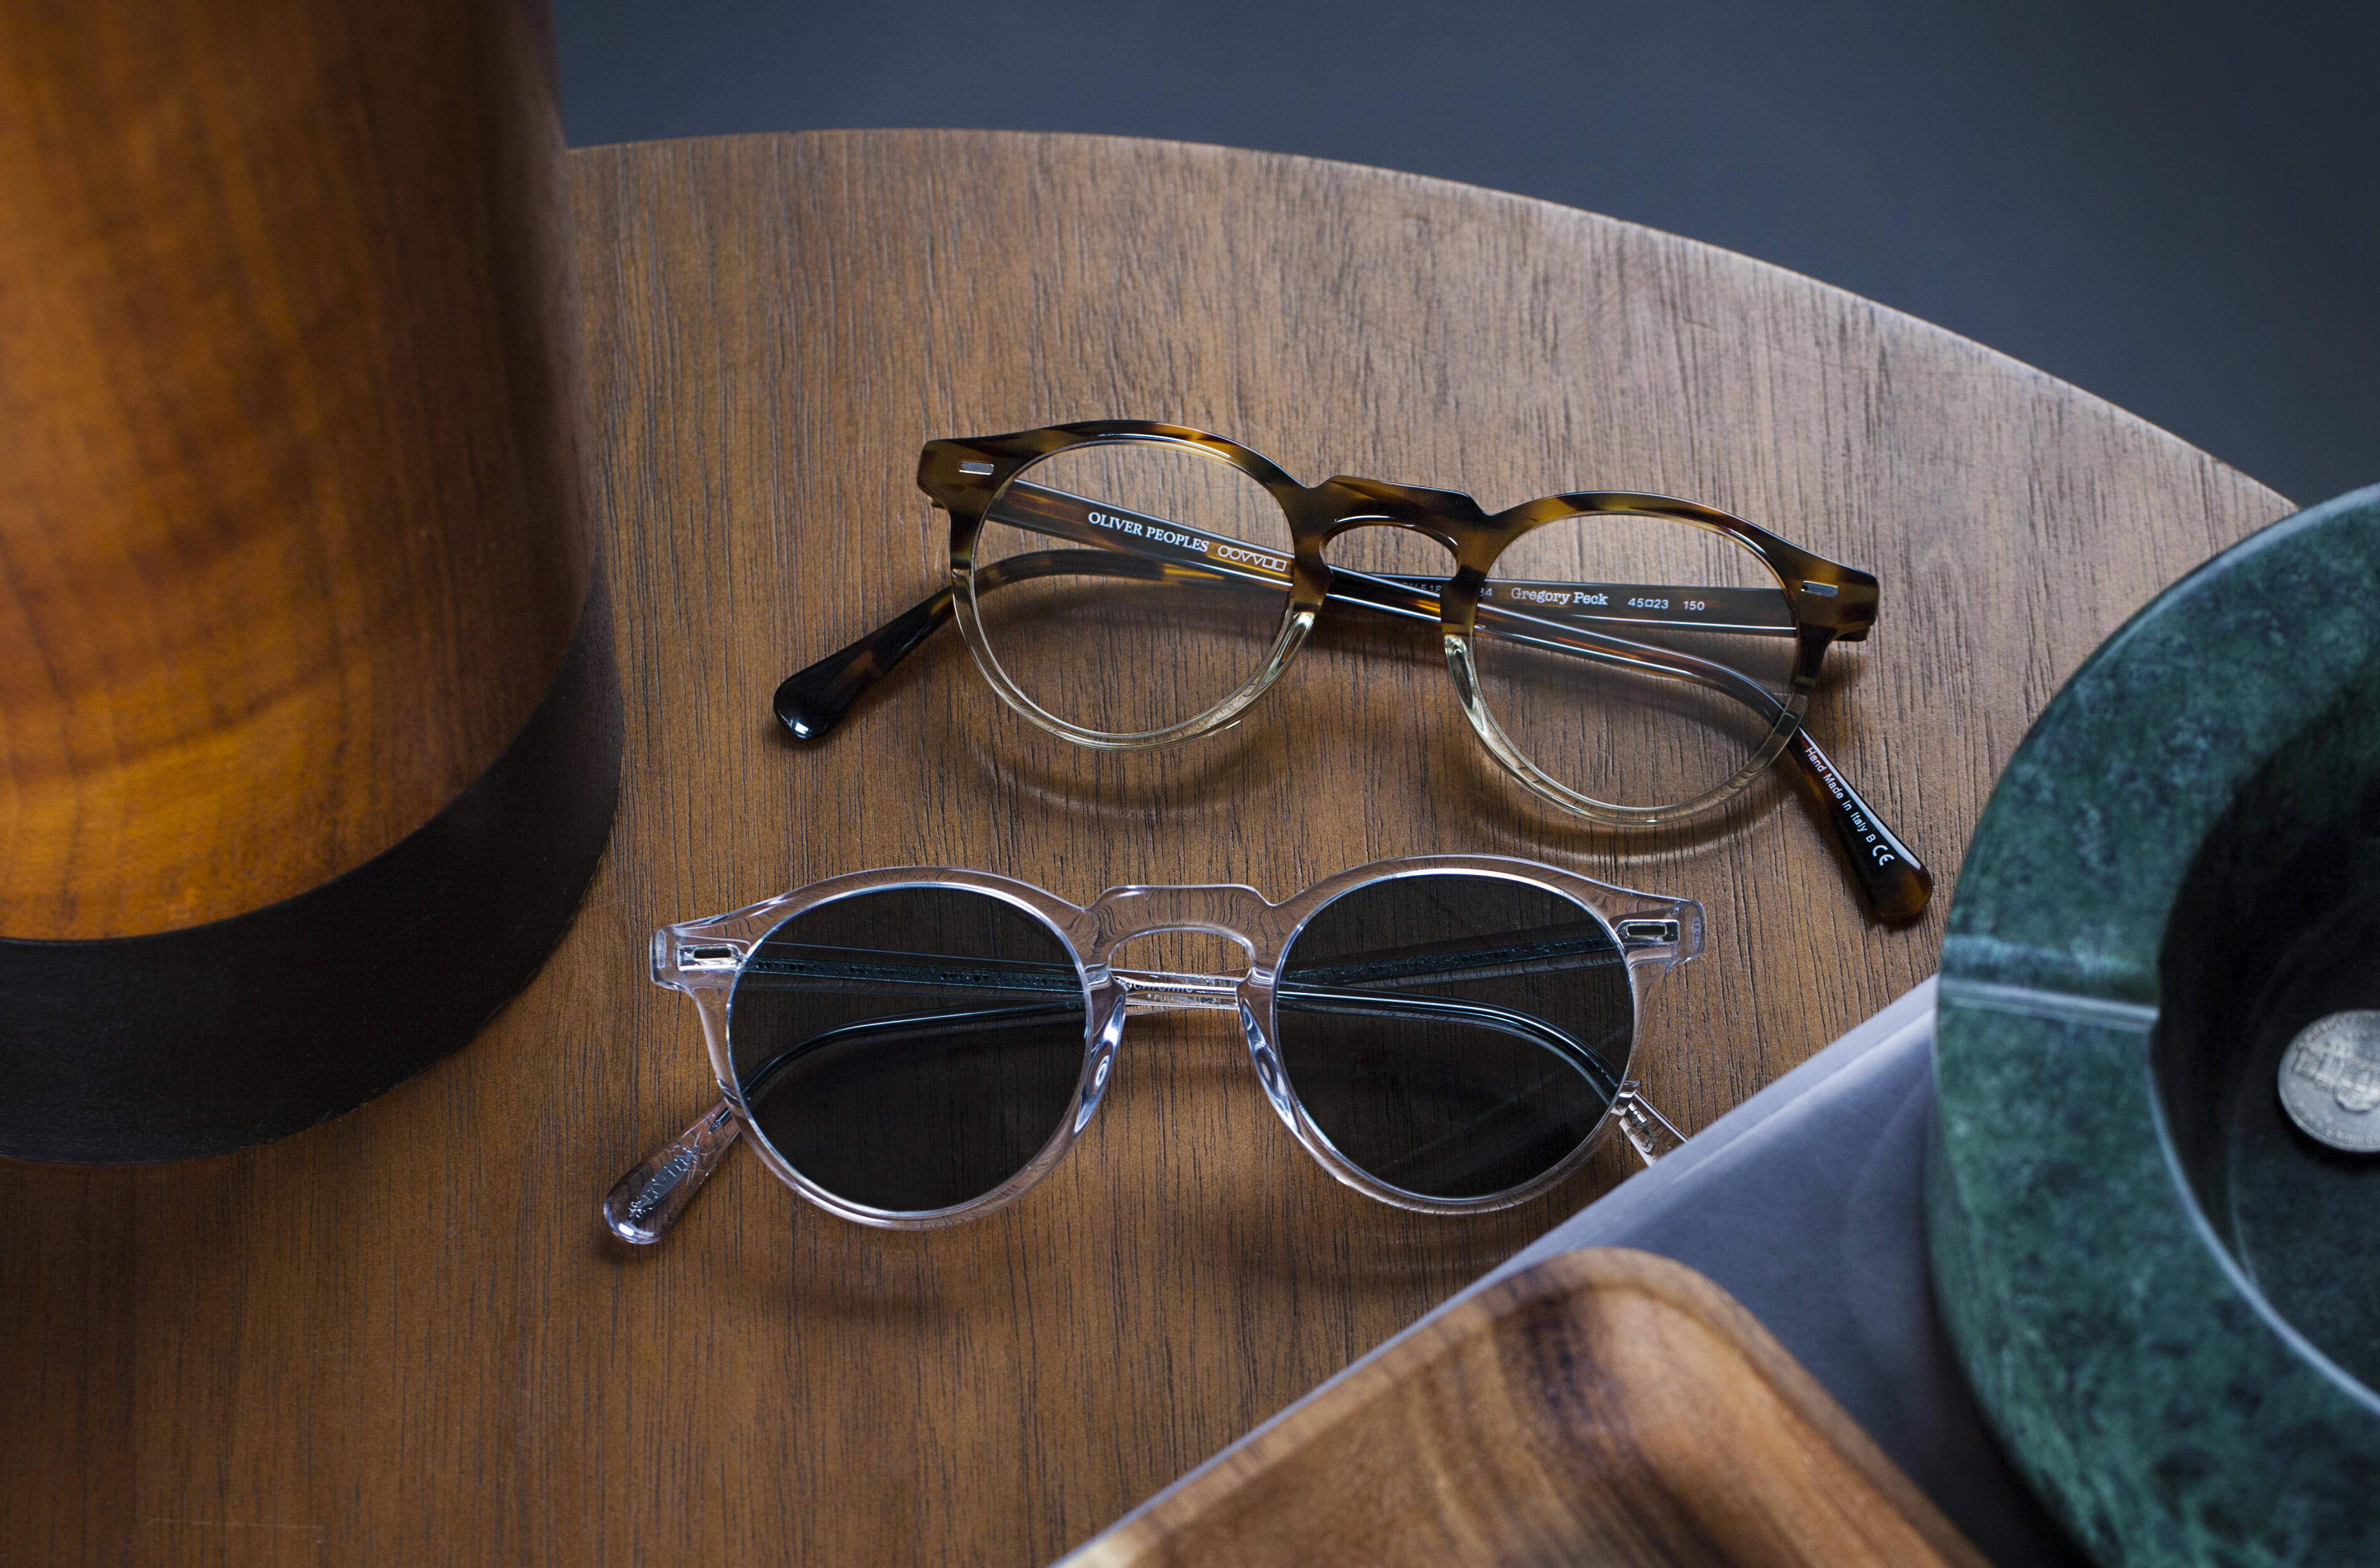 Sunglasses - Iconic Sunglasses Collections | Oliver Peoples USA